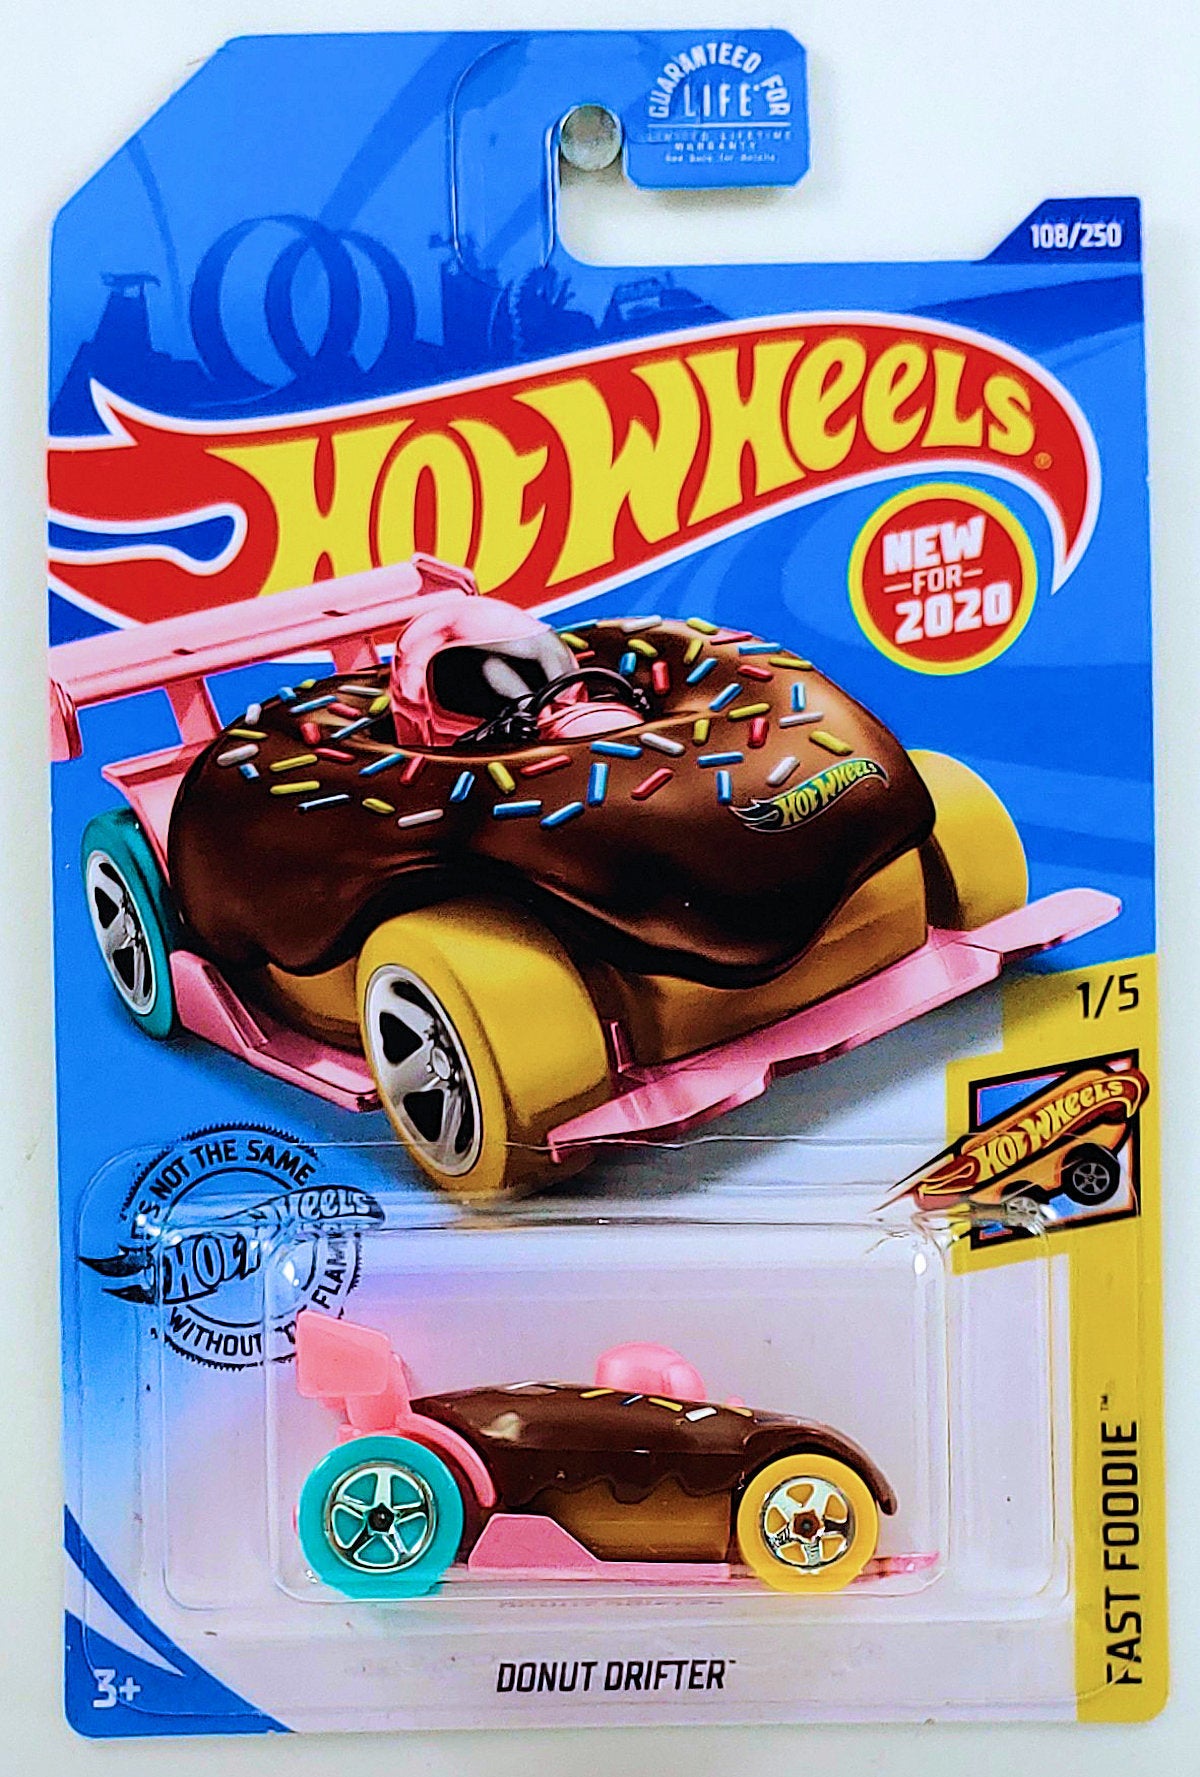 Hot Wheels 2020 - Collector # 108/250 - Fast Foodie 1/5 - New Models - Donut Drifter - Chocolate Brown & Pink with Sprinkles